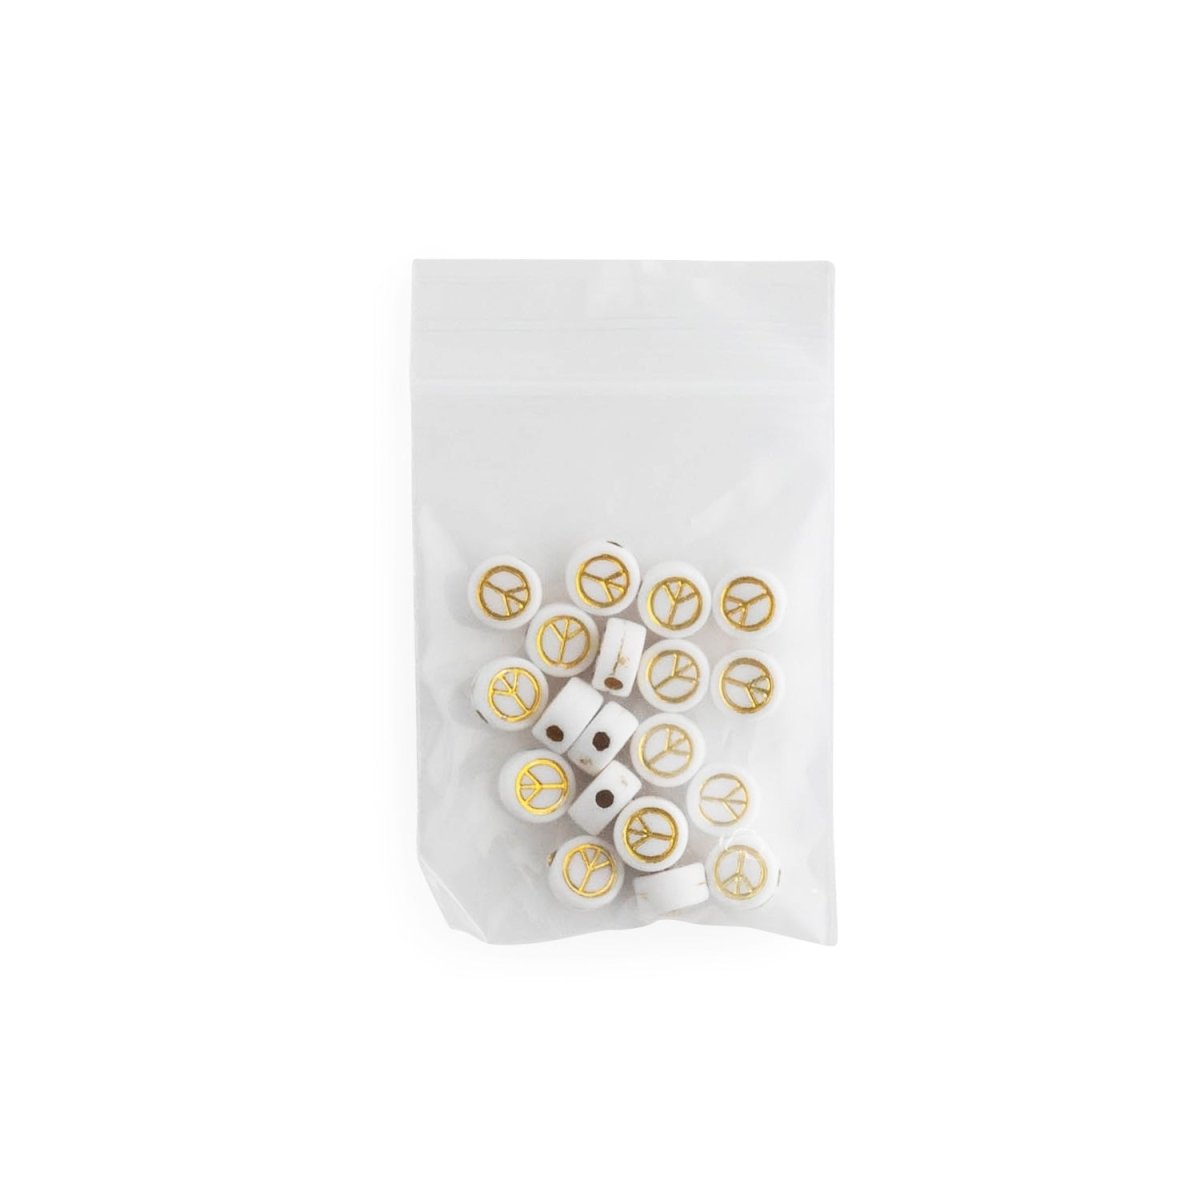 Accent Beads Peace - Round White from Cara & Co Craft Supply